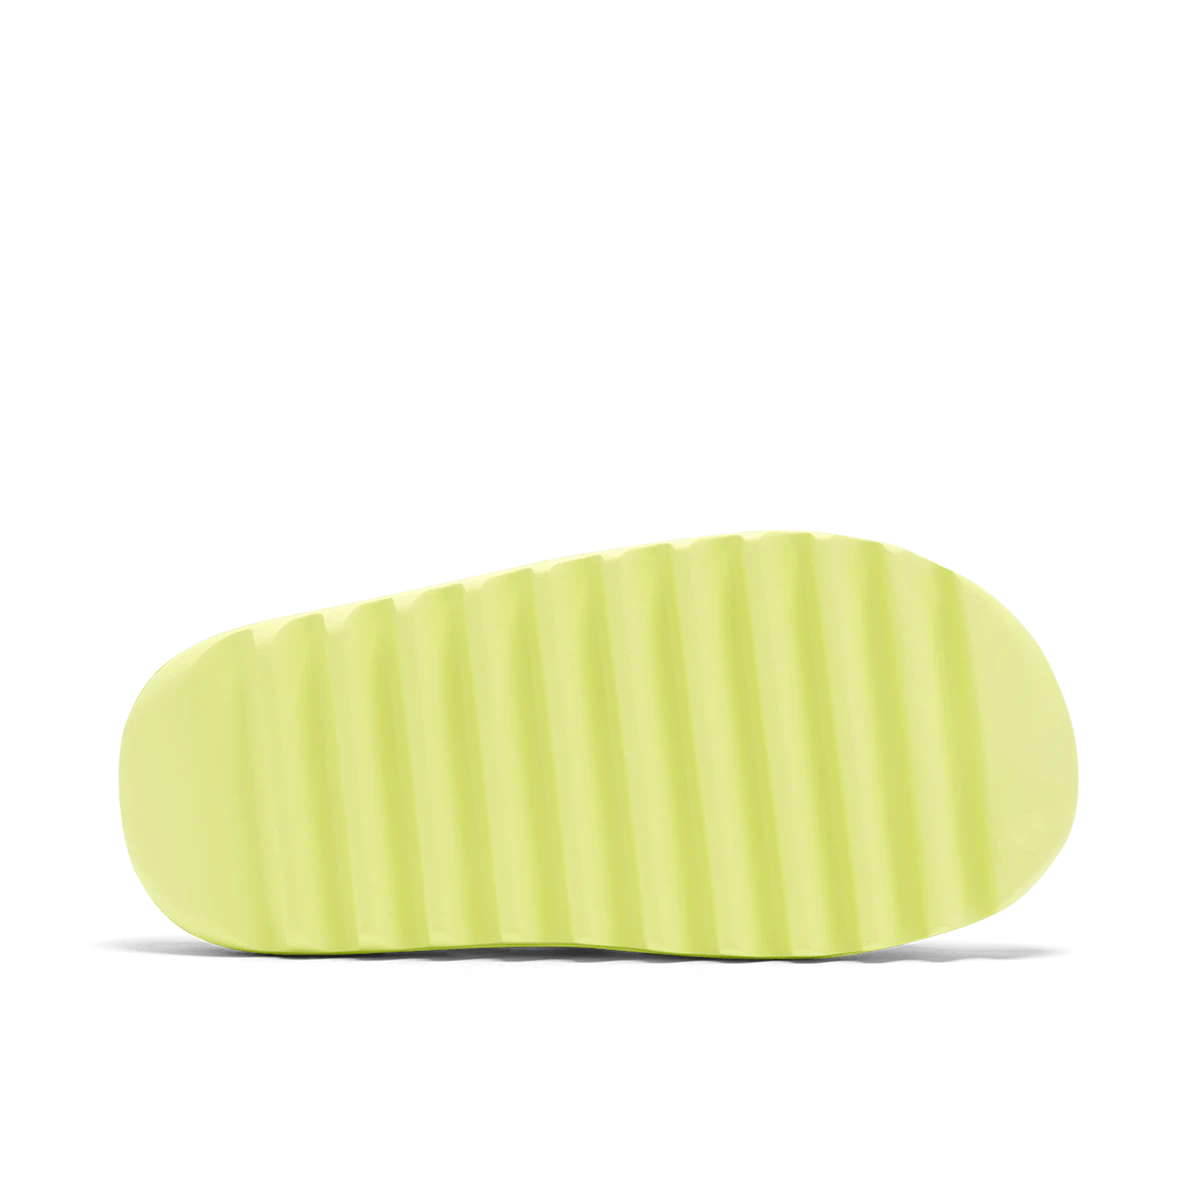 adidas Yeezy Slide Glow Green by Yeezy from £150.00